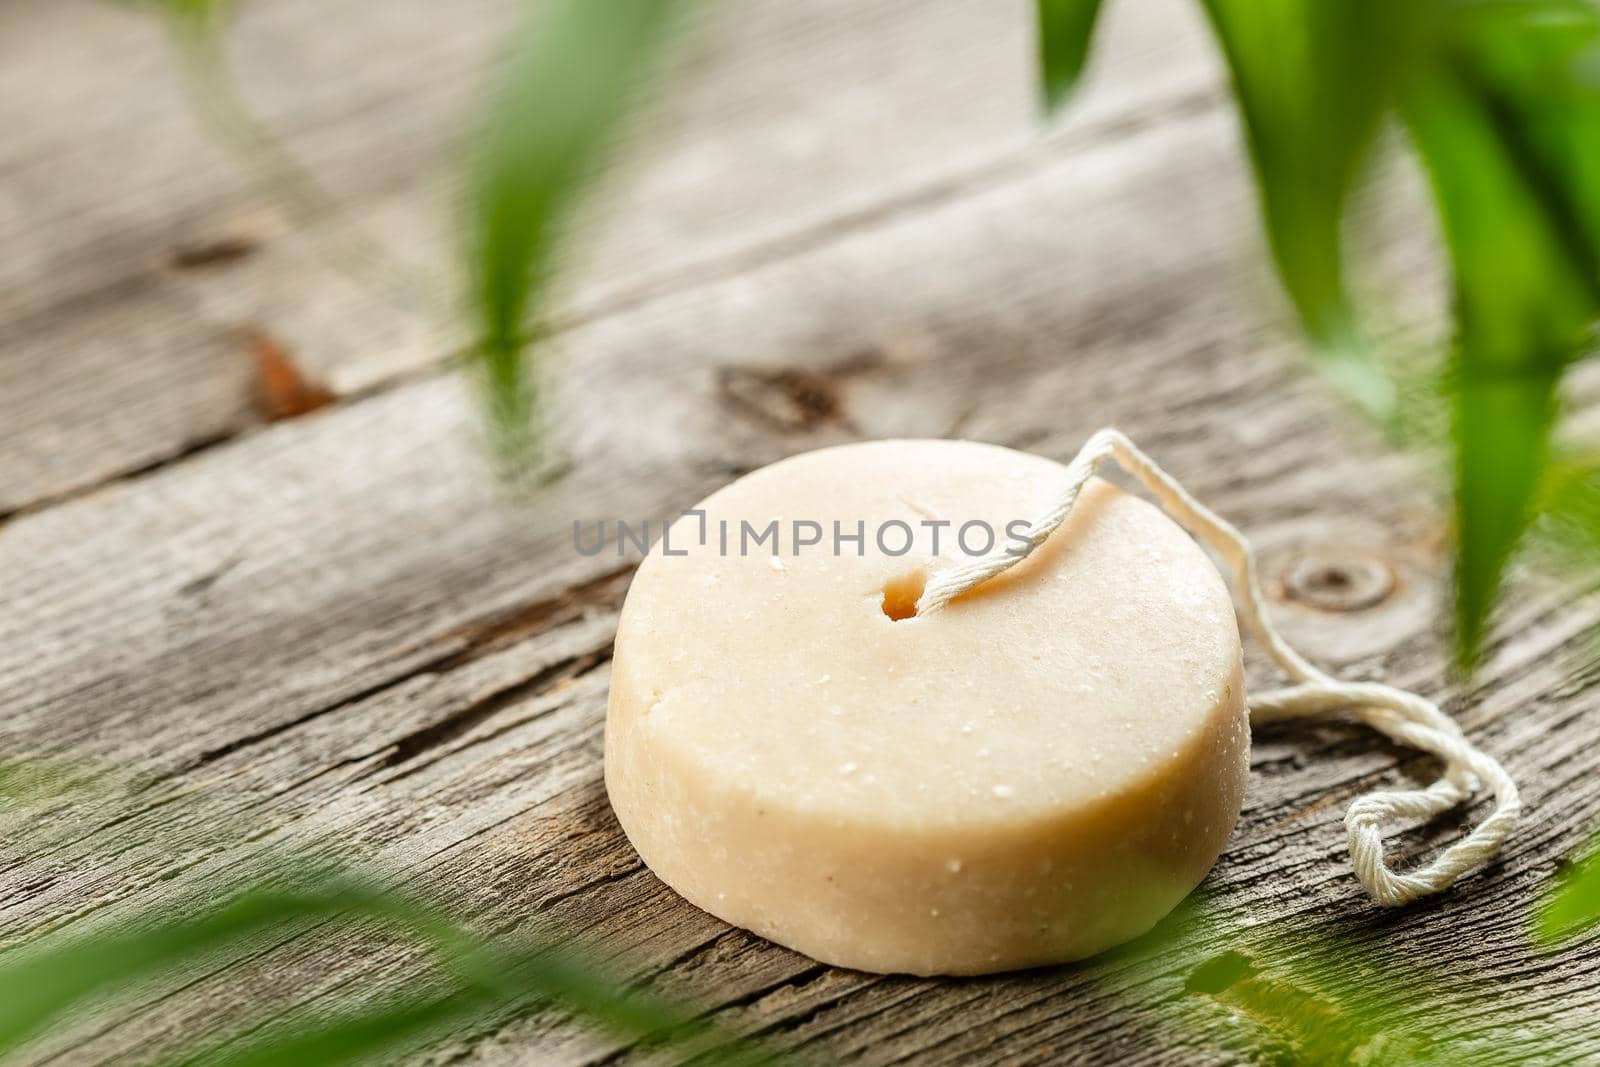 Shampoo bar, natural herbal soap or laundry soap on wooden background. Sustainable eco friendly product. Zero waste bathroom.